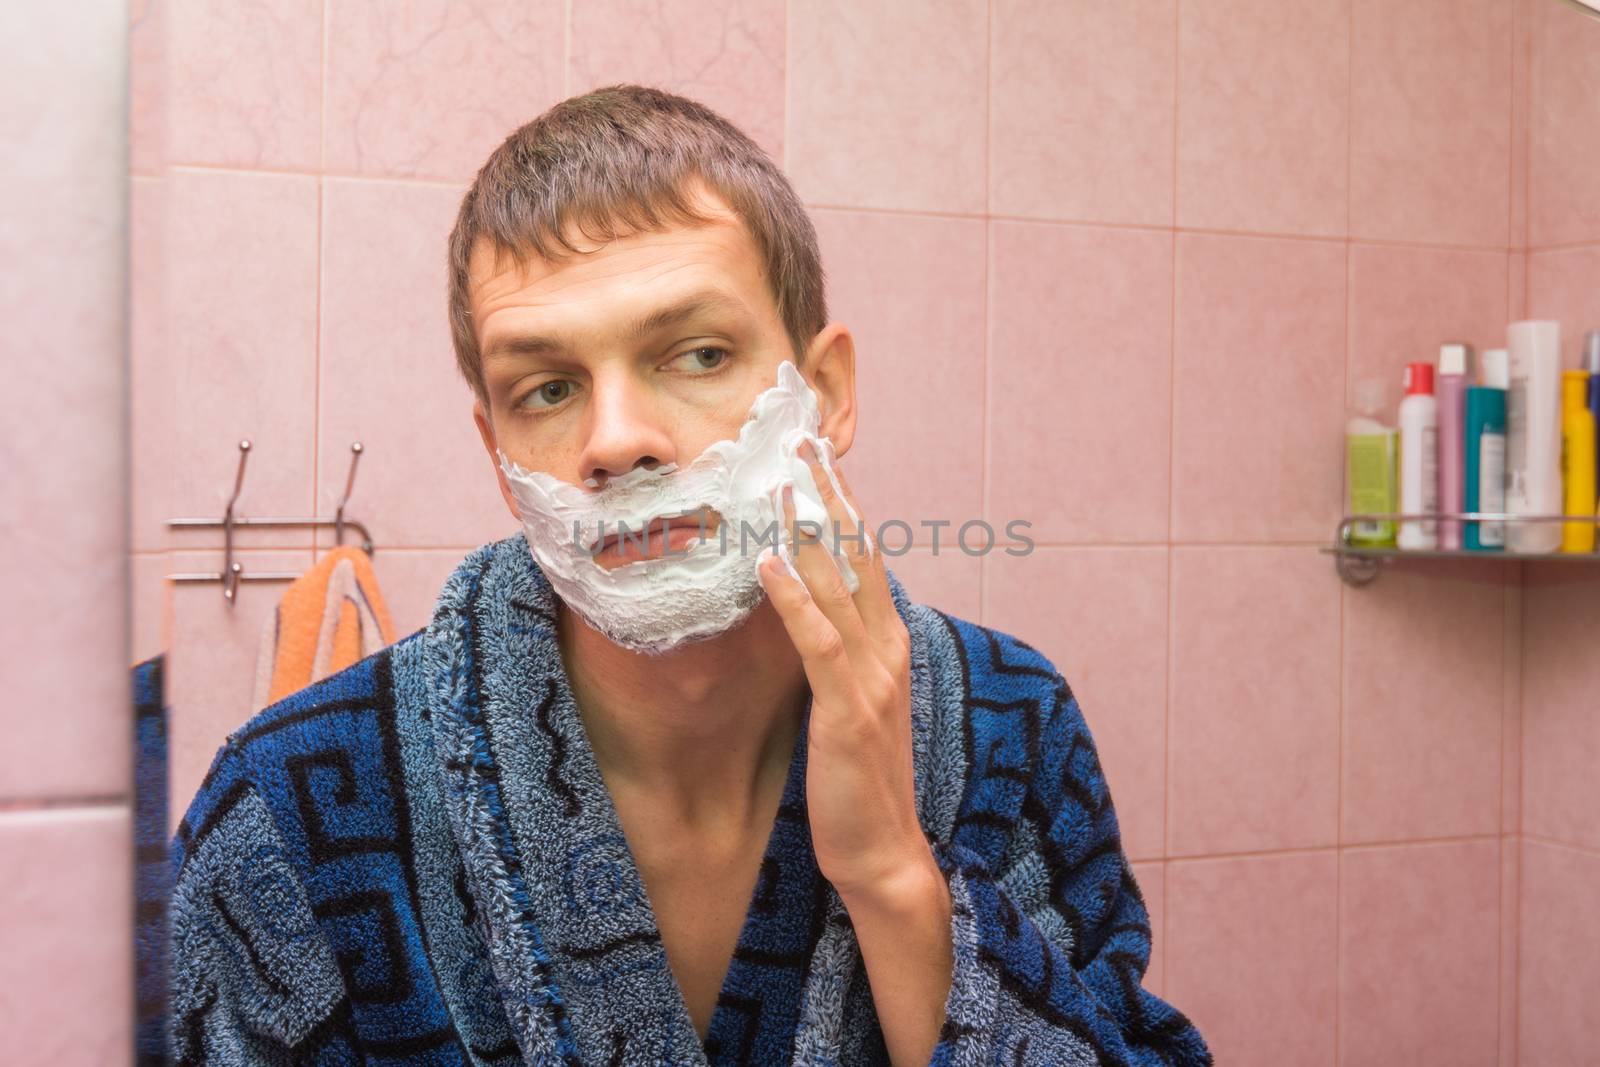 The young man gets shaving foam on face by Madhourse